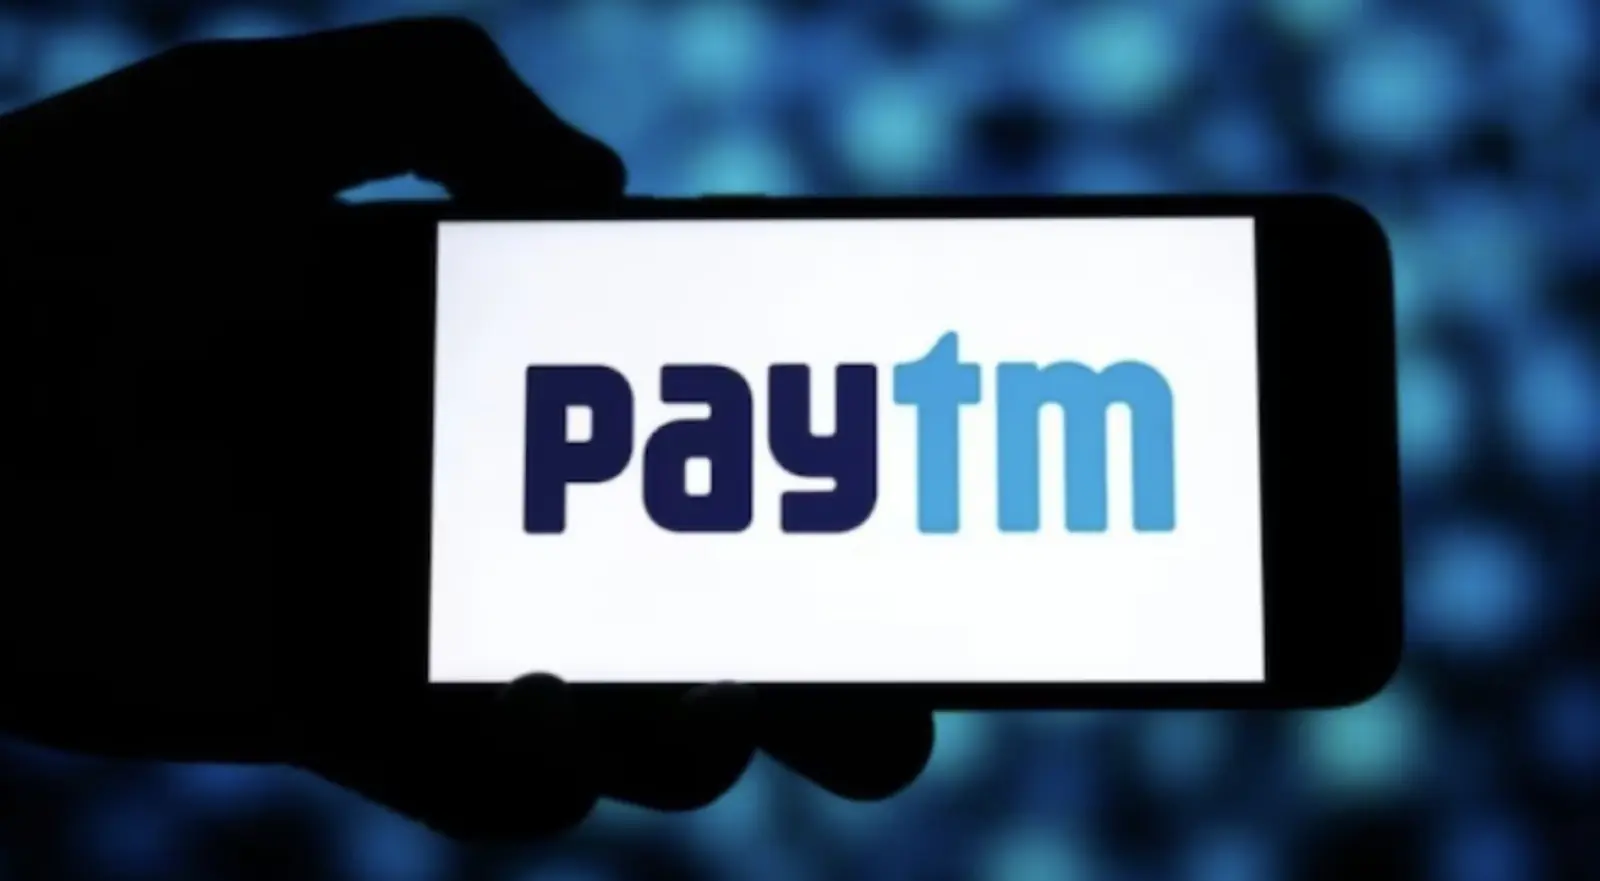 PayTm Share Price: One97 Communications' stock fell, company's shares fell by 18%